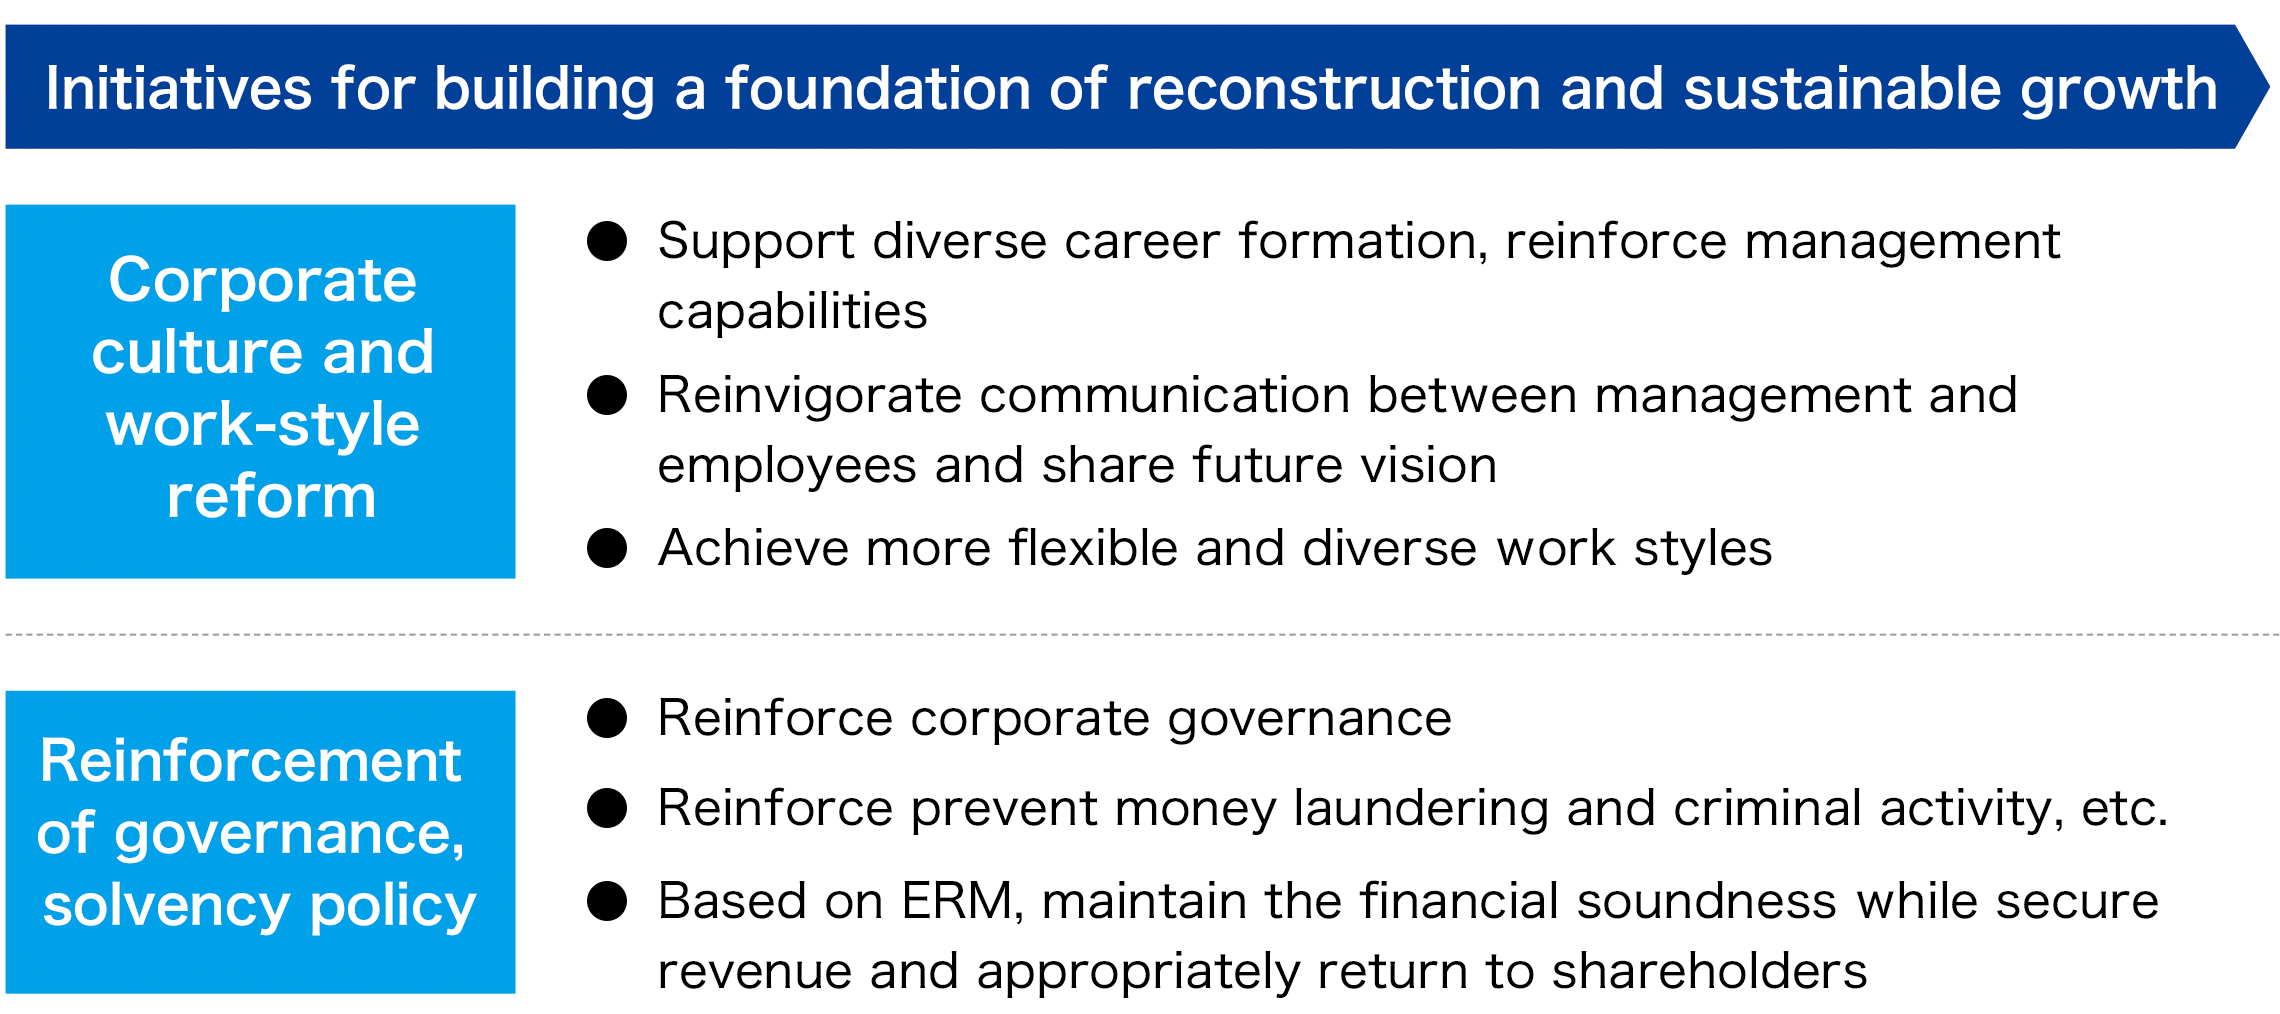 Initiatives for building a foundation of reconstruction and sustainable growth